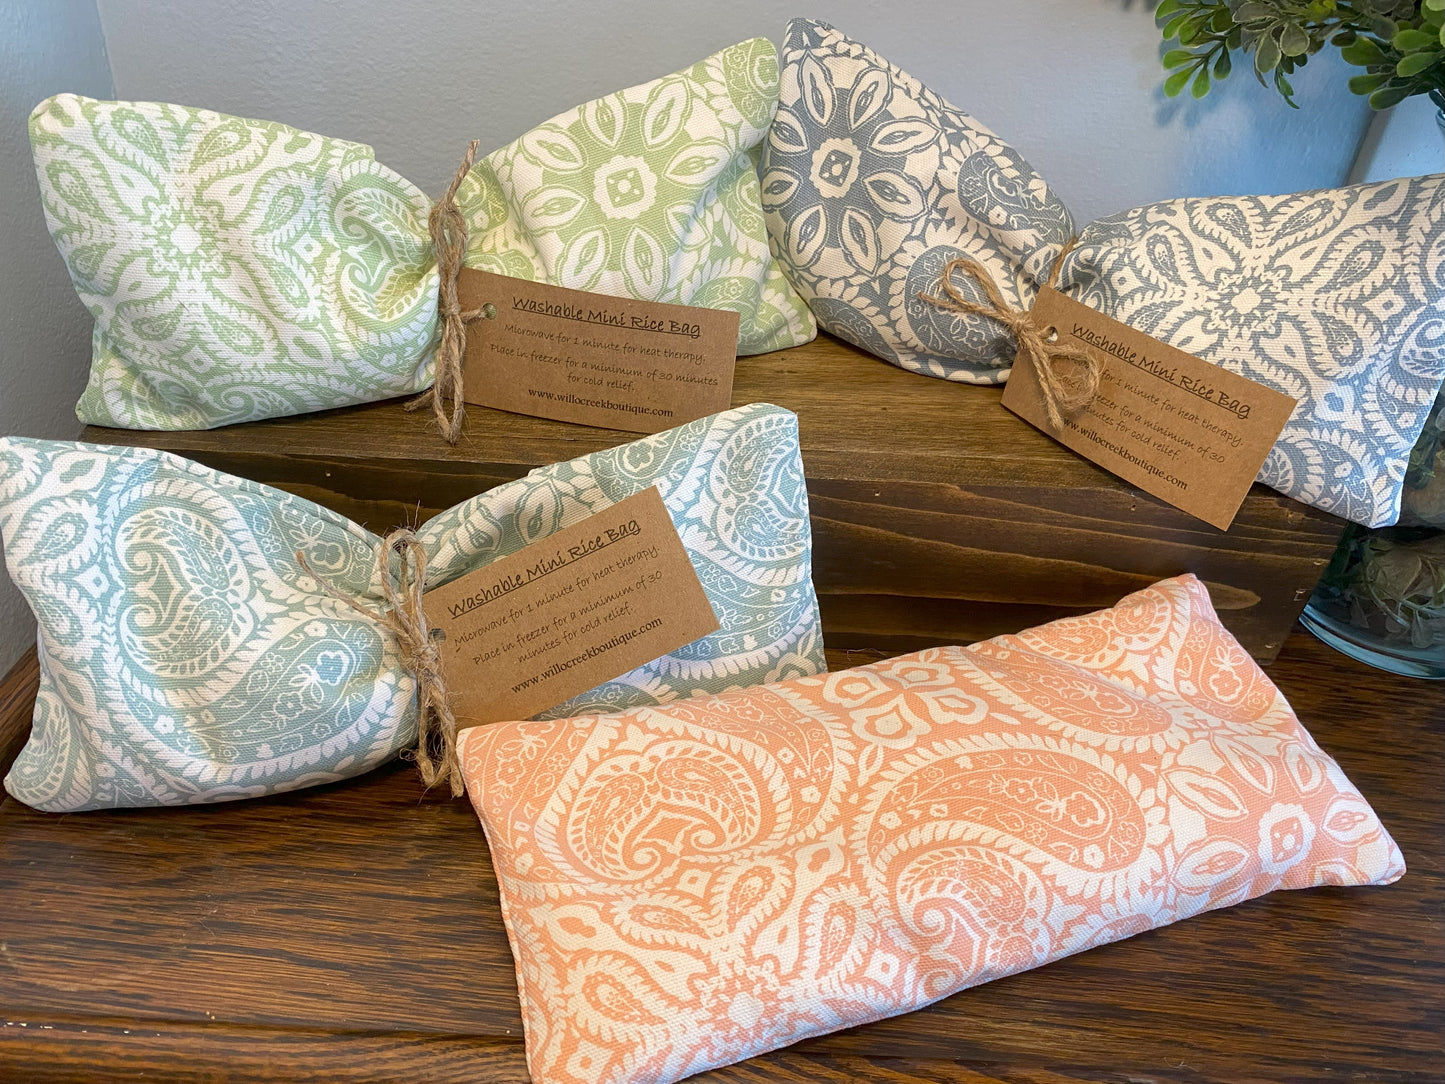 Washable Microwavable Rice Bag l Eye Pillow l Comfort Therapy Pack l Aromatherapy Bag l Paisley